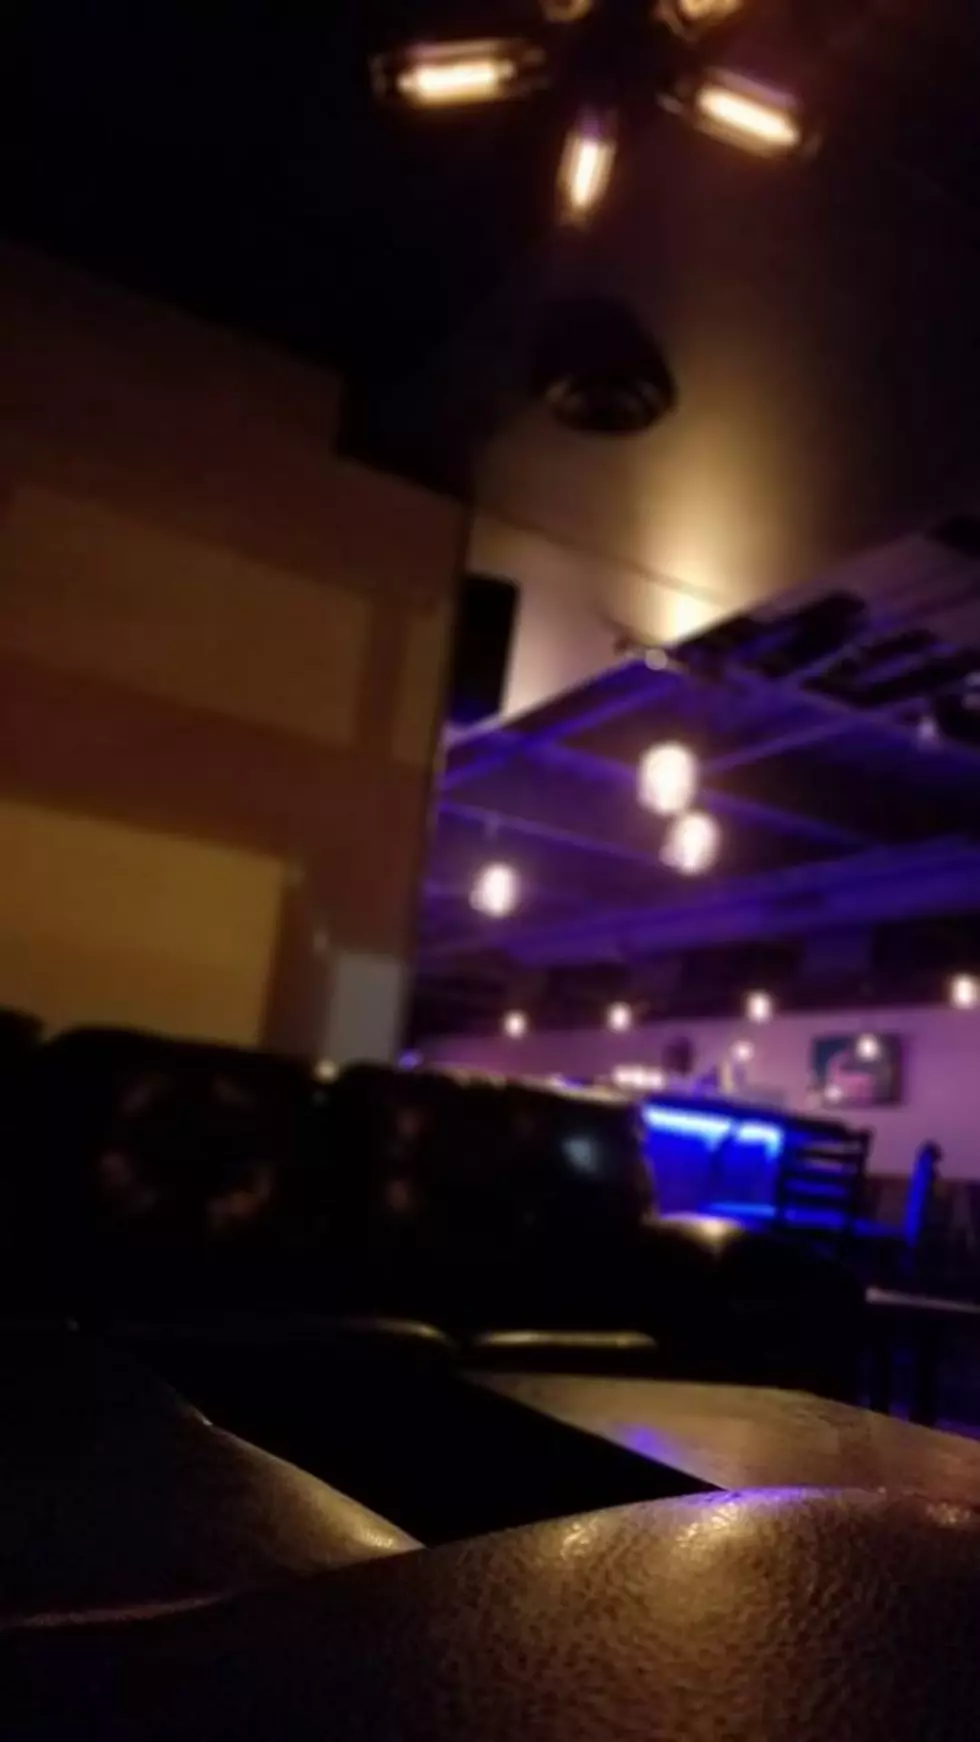 New Rochester Lounge Set For January Opening